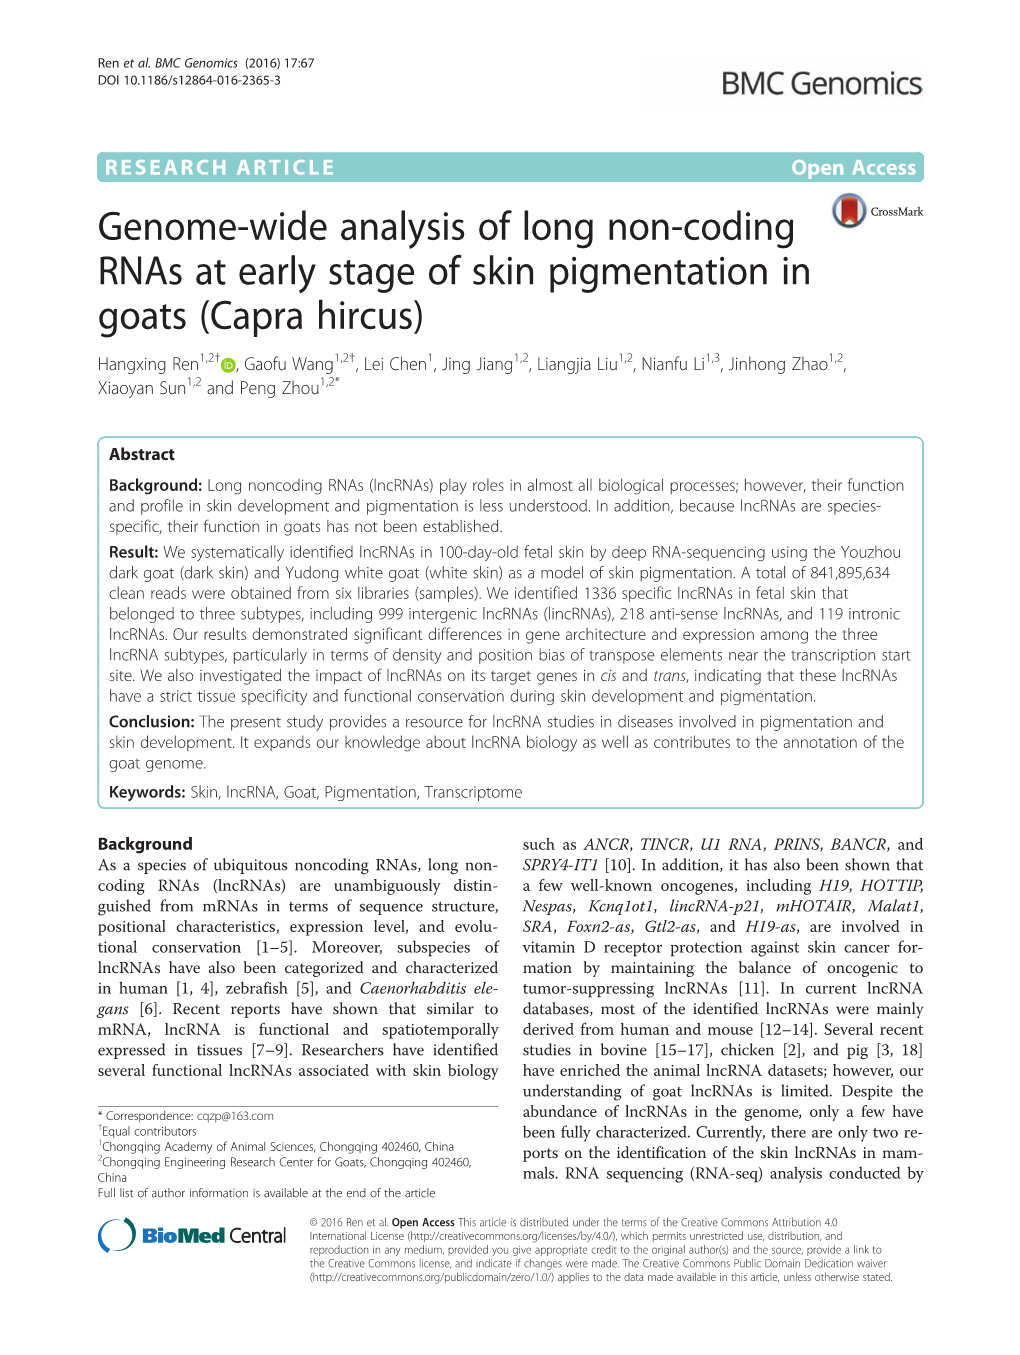 Genome-Wide Analysis of Long Non-Coding Rnas